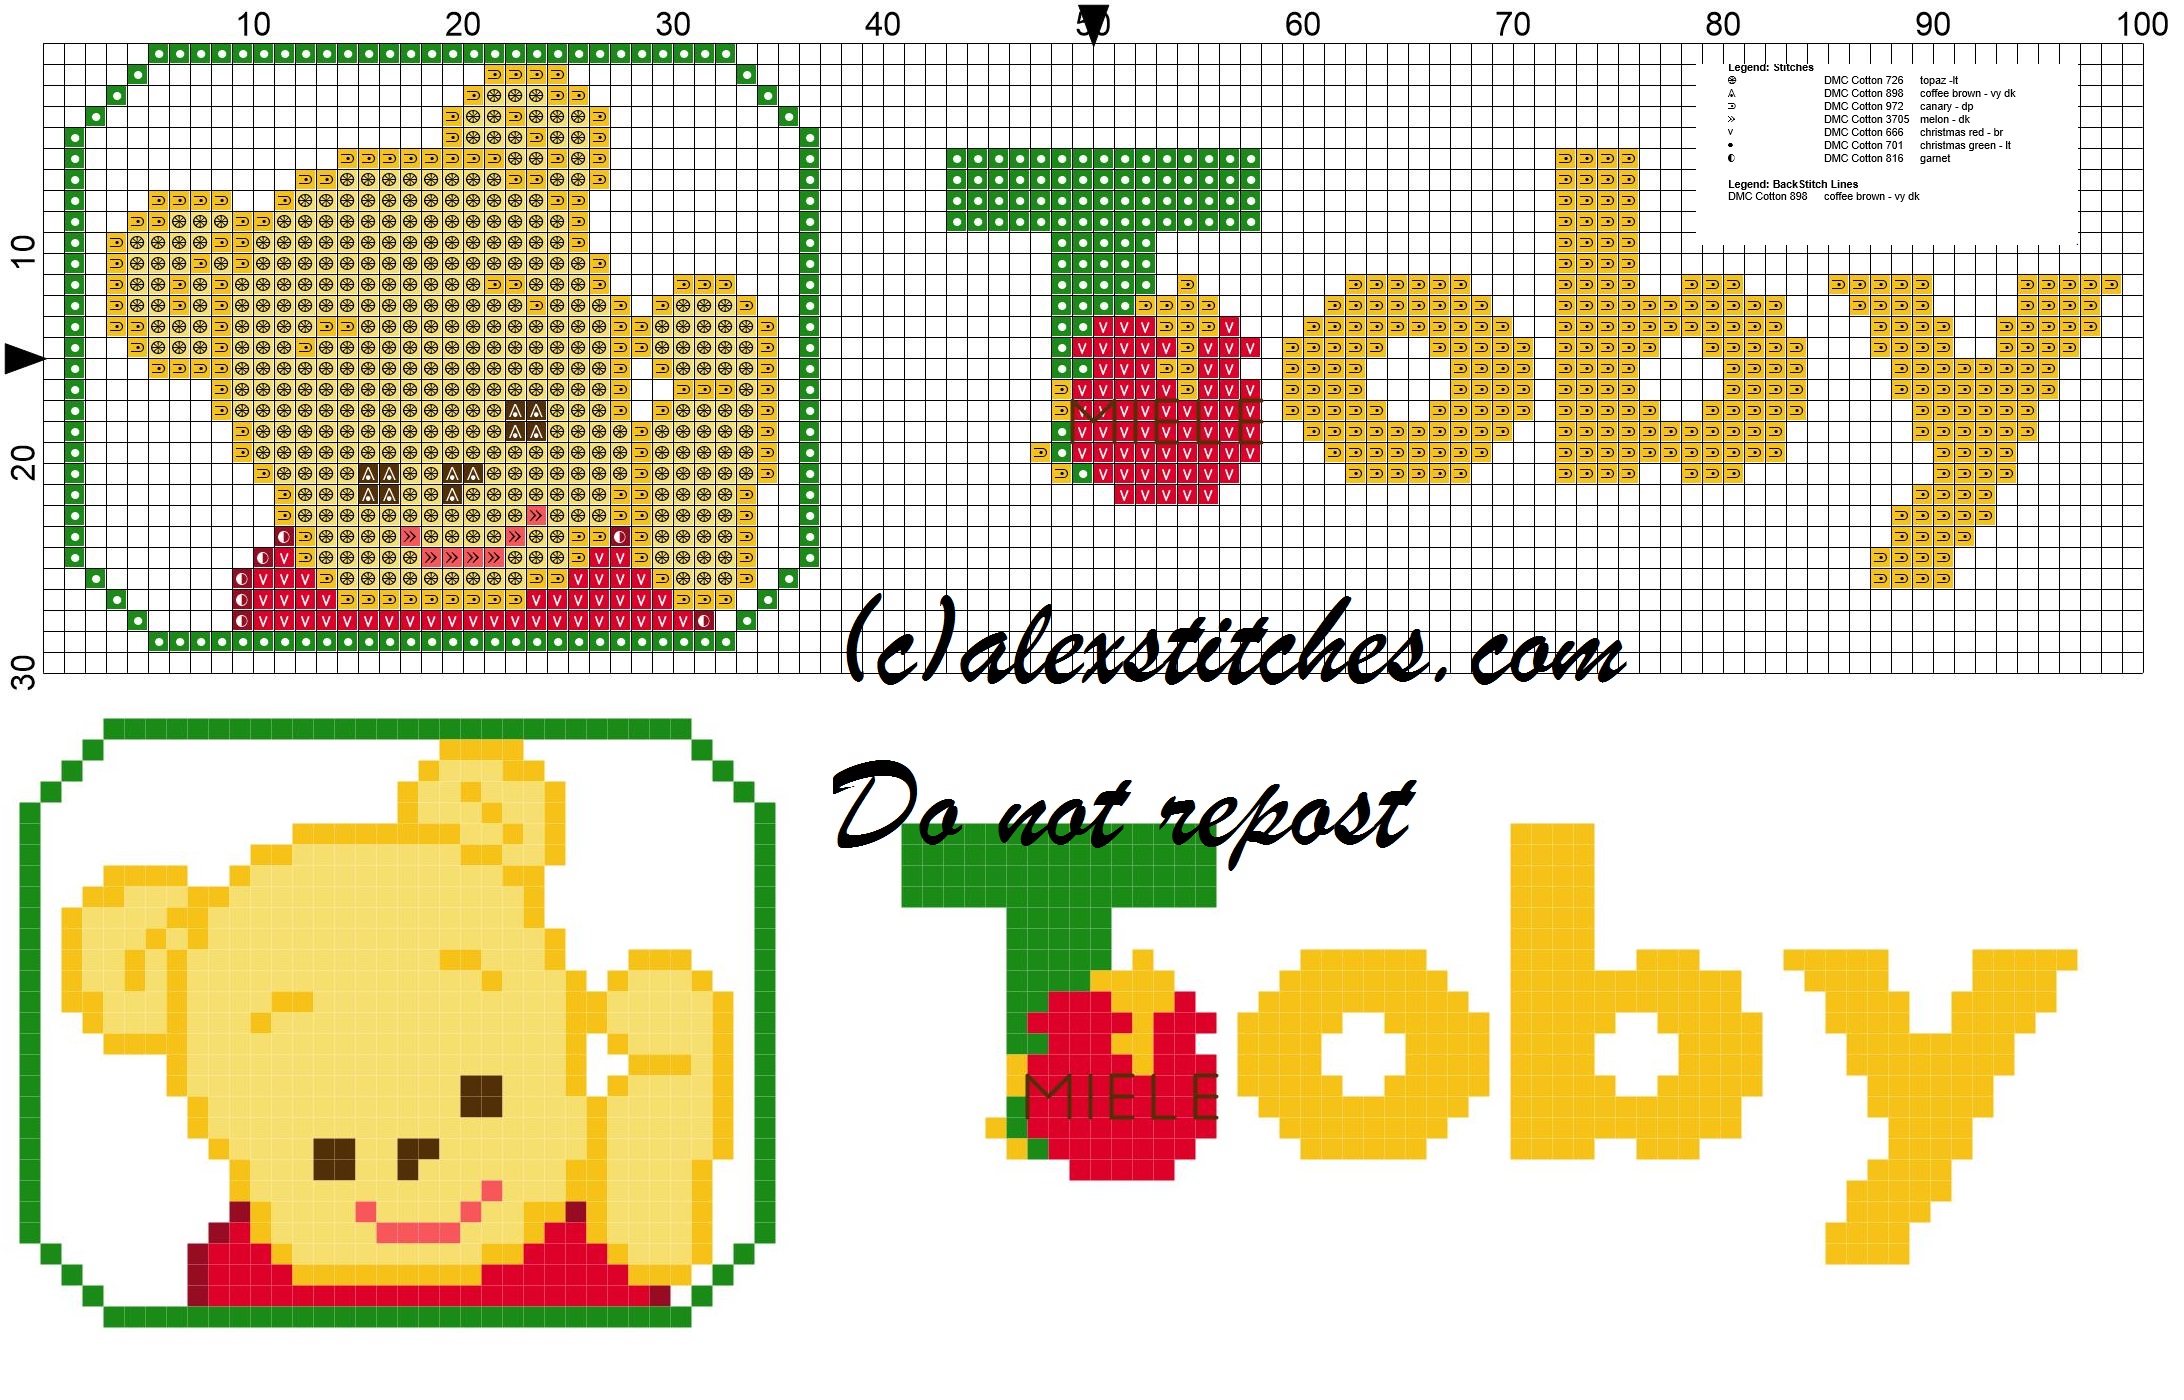 Toby name with Baby winnie the pooh free cross stitches pattern